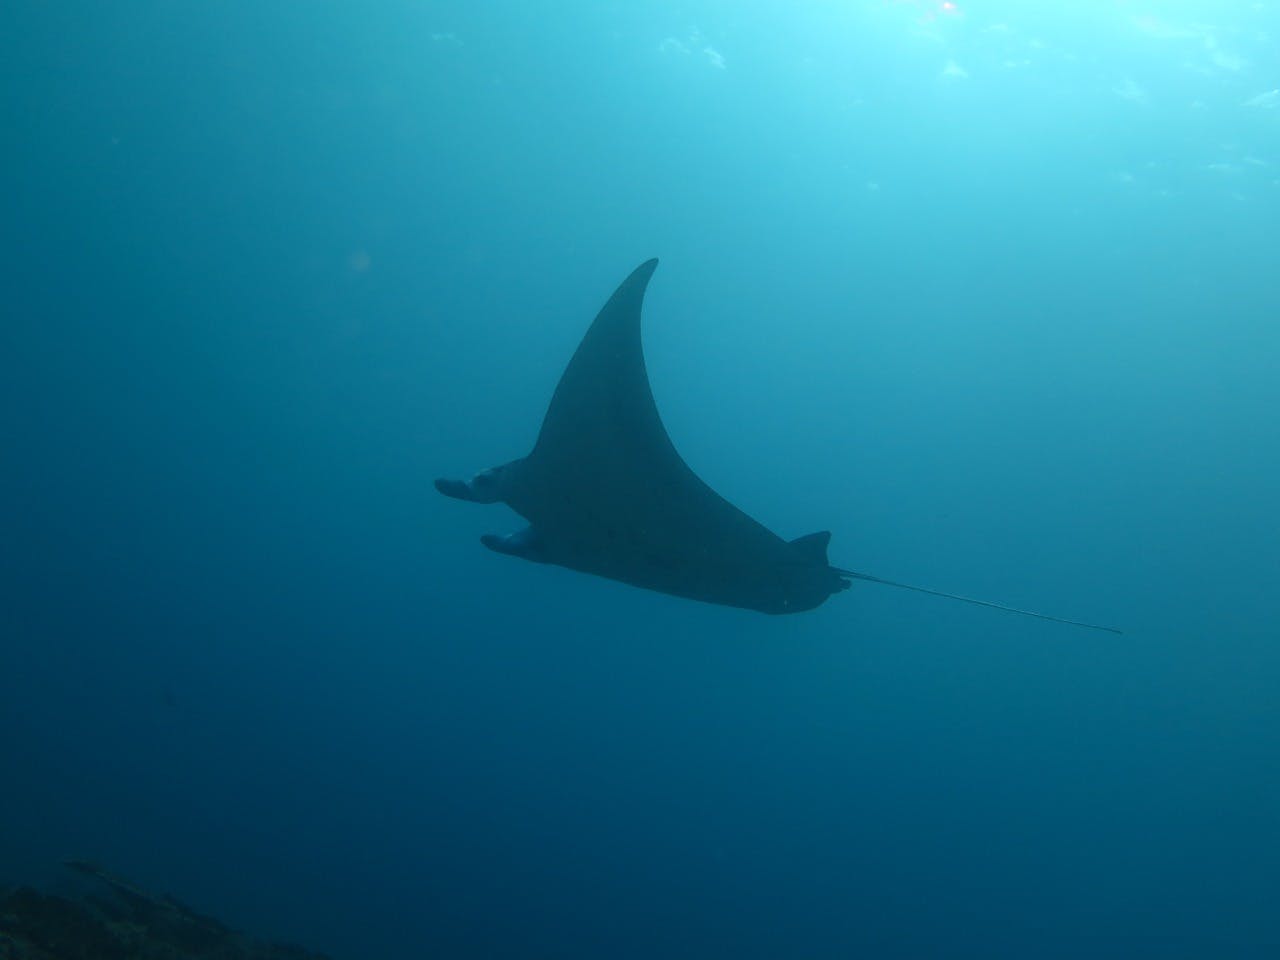 Understanding artisanal fishing activity and data collection on sharks and rays in Indonesia